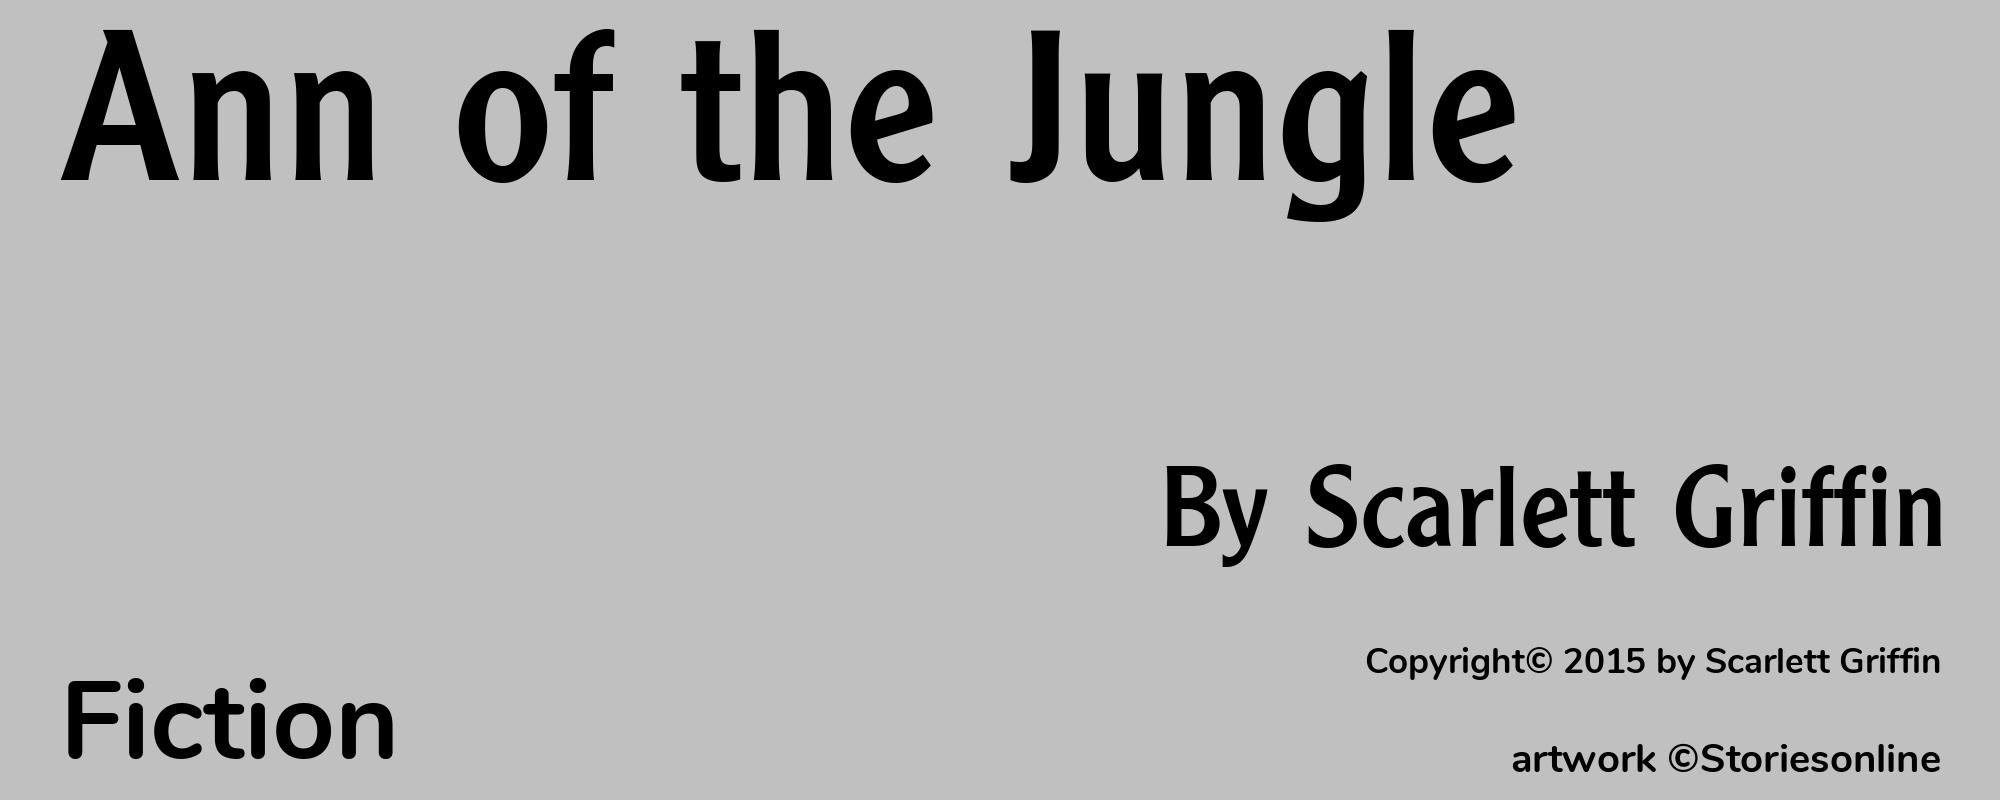 Ann of the Jungle - Cover